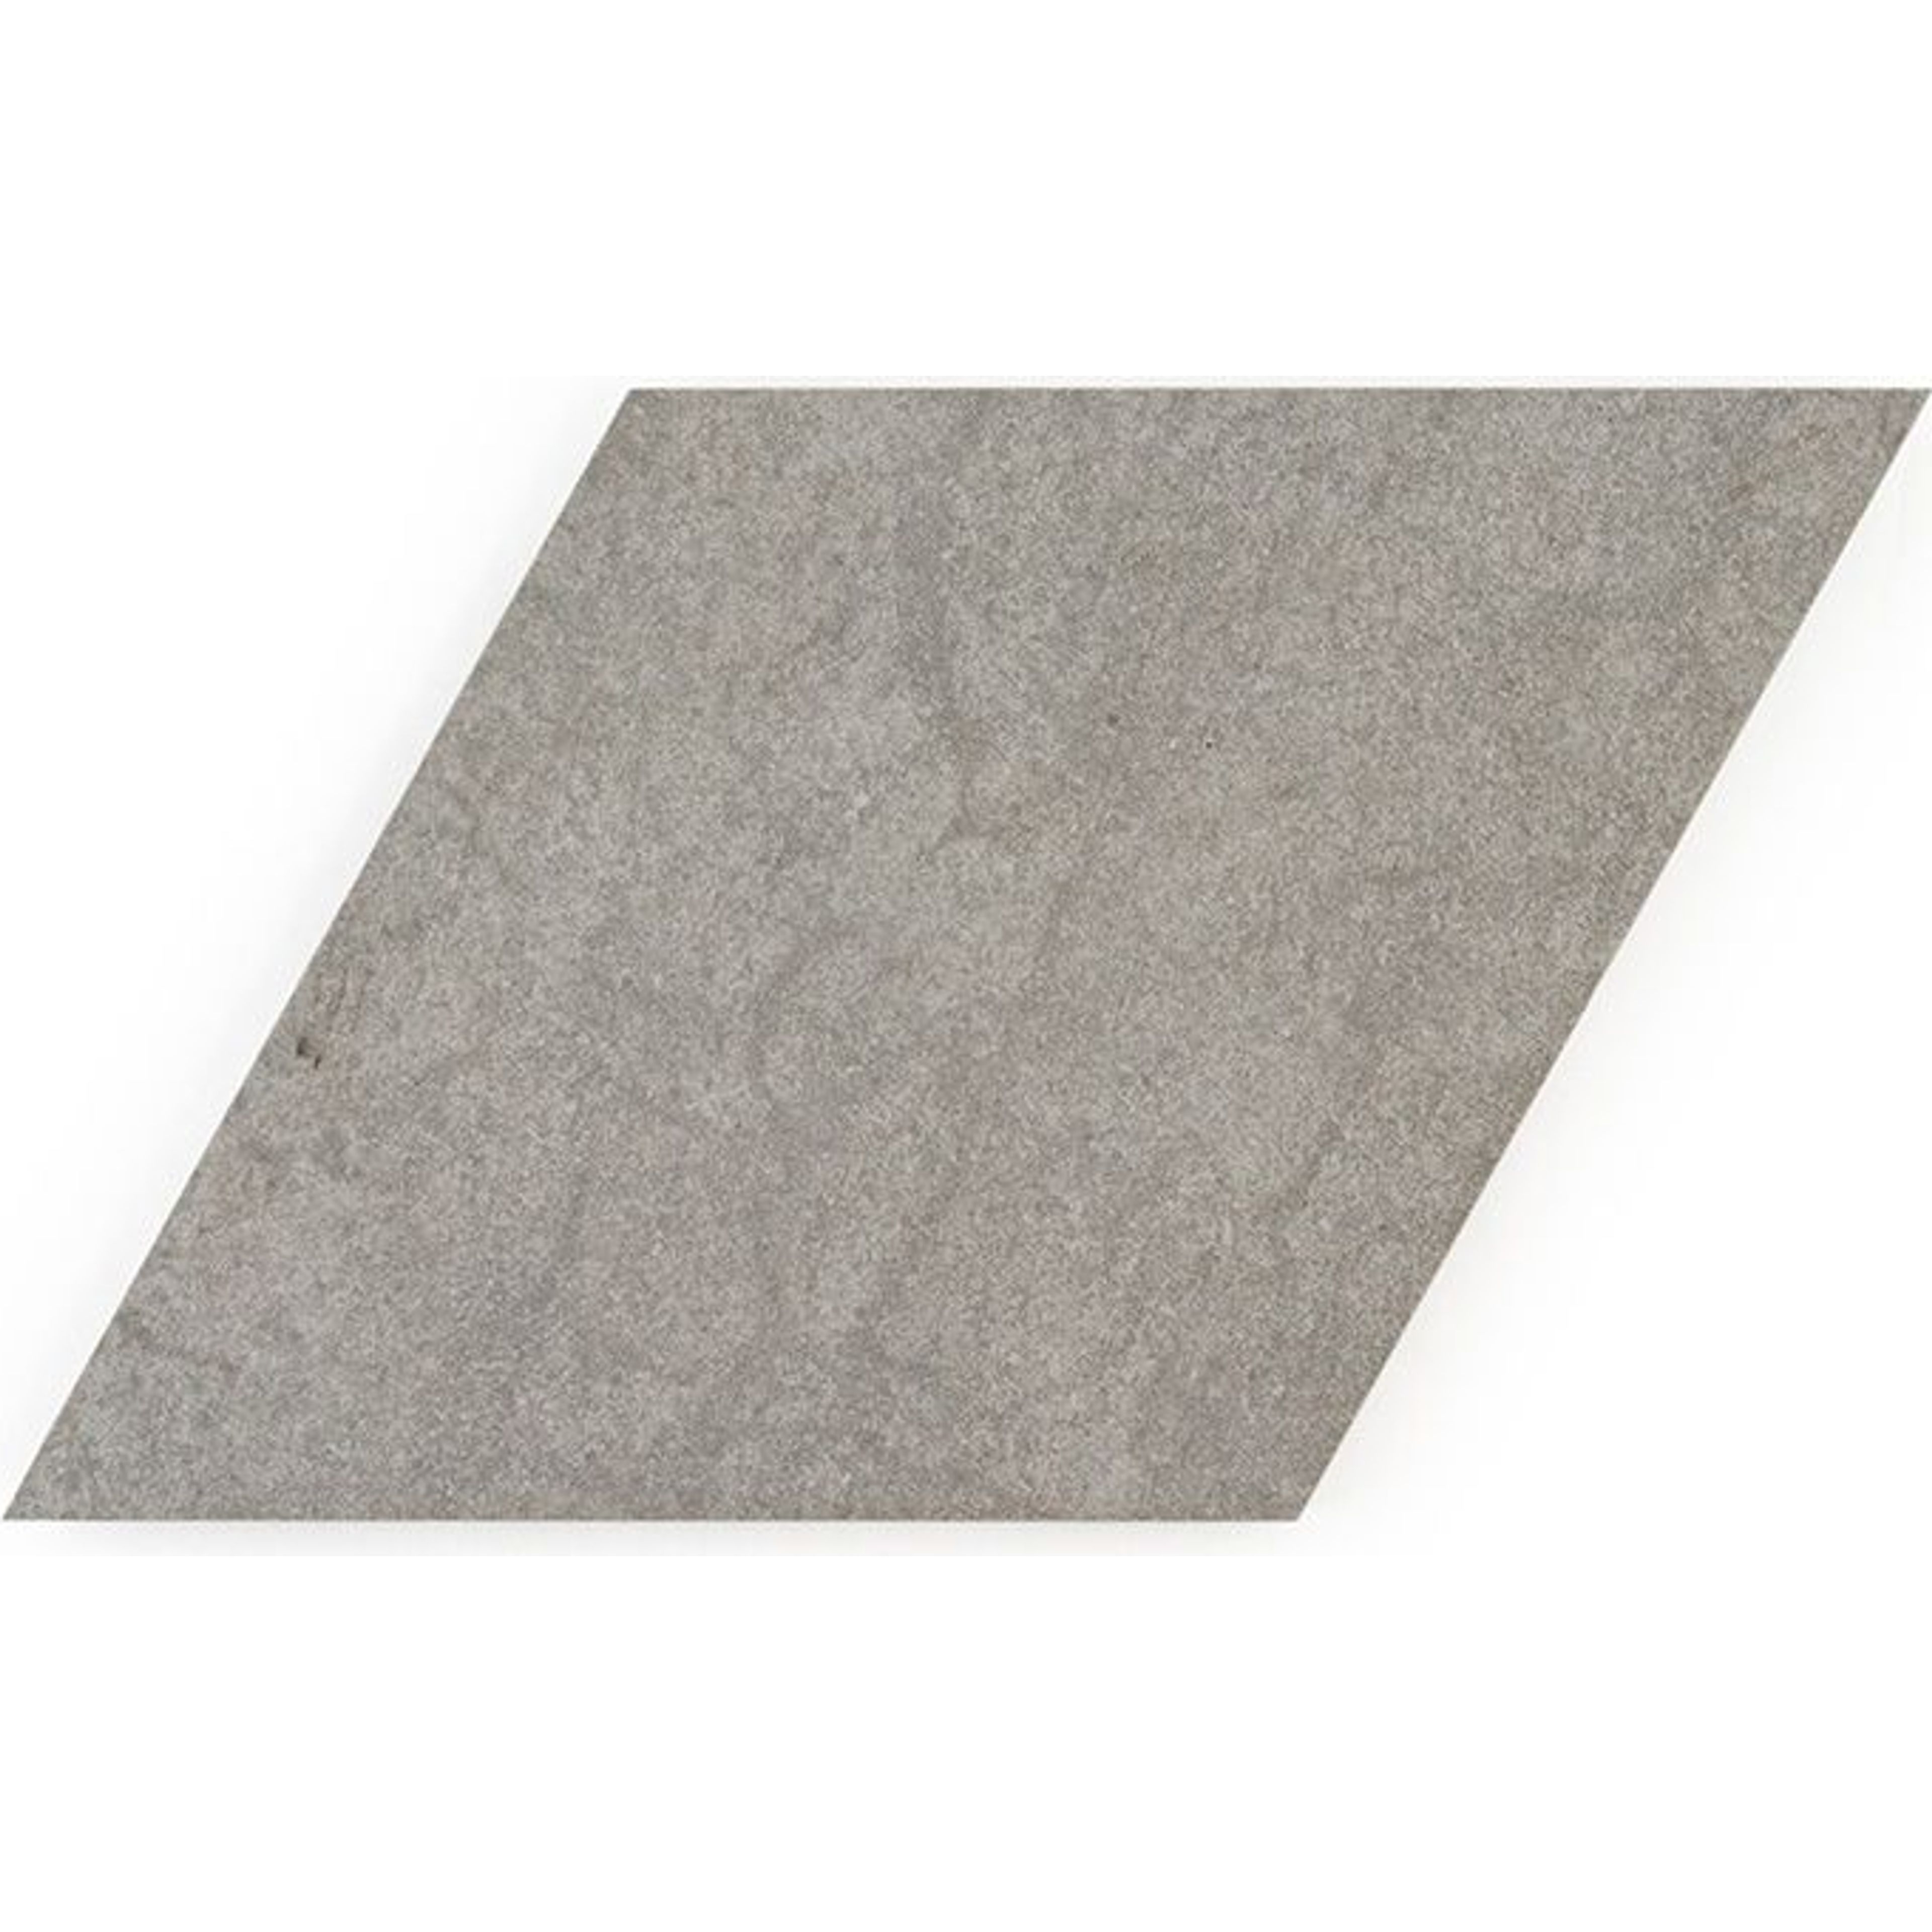 9.75" x 16.875"  undefined Paver